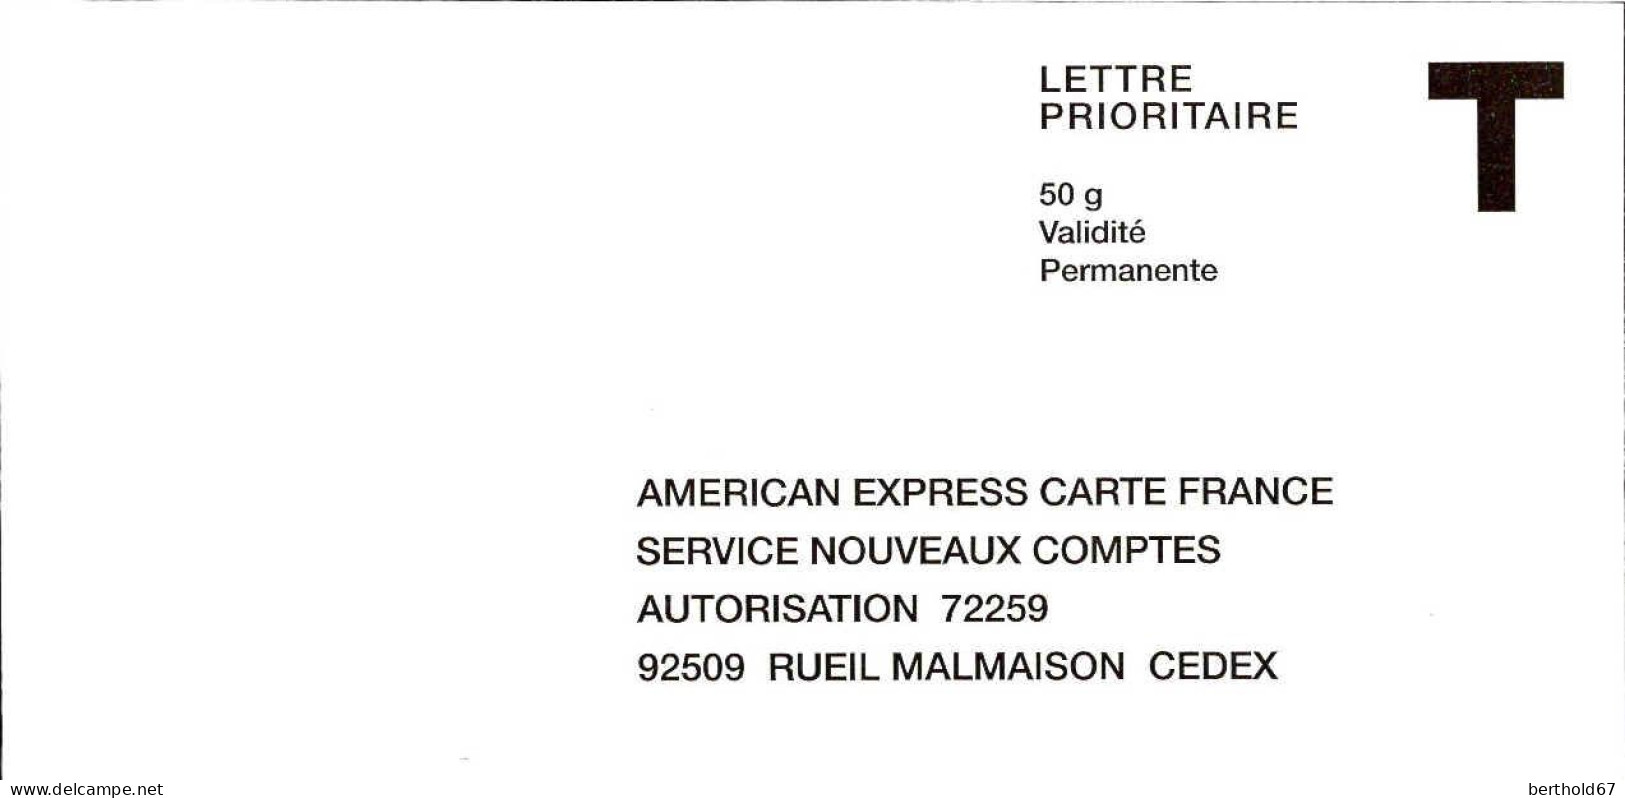 France Entier-P N** (7007) American Express Carte France Lettre Prioritaire 50g V.perma - Buste Risposta T